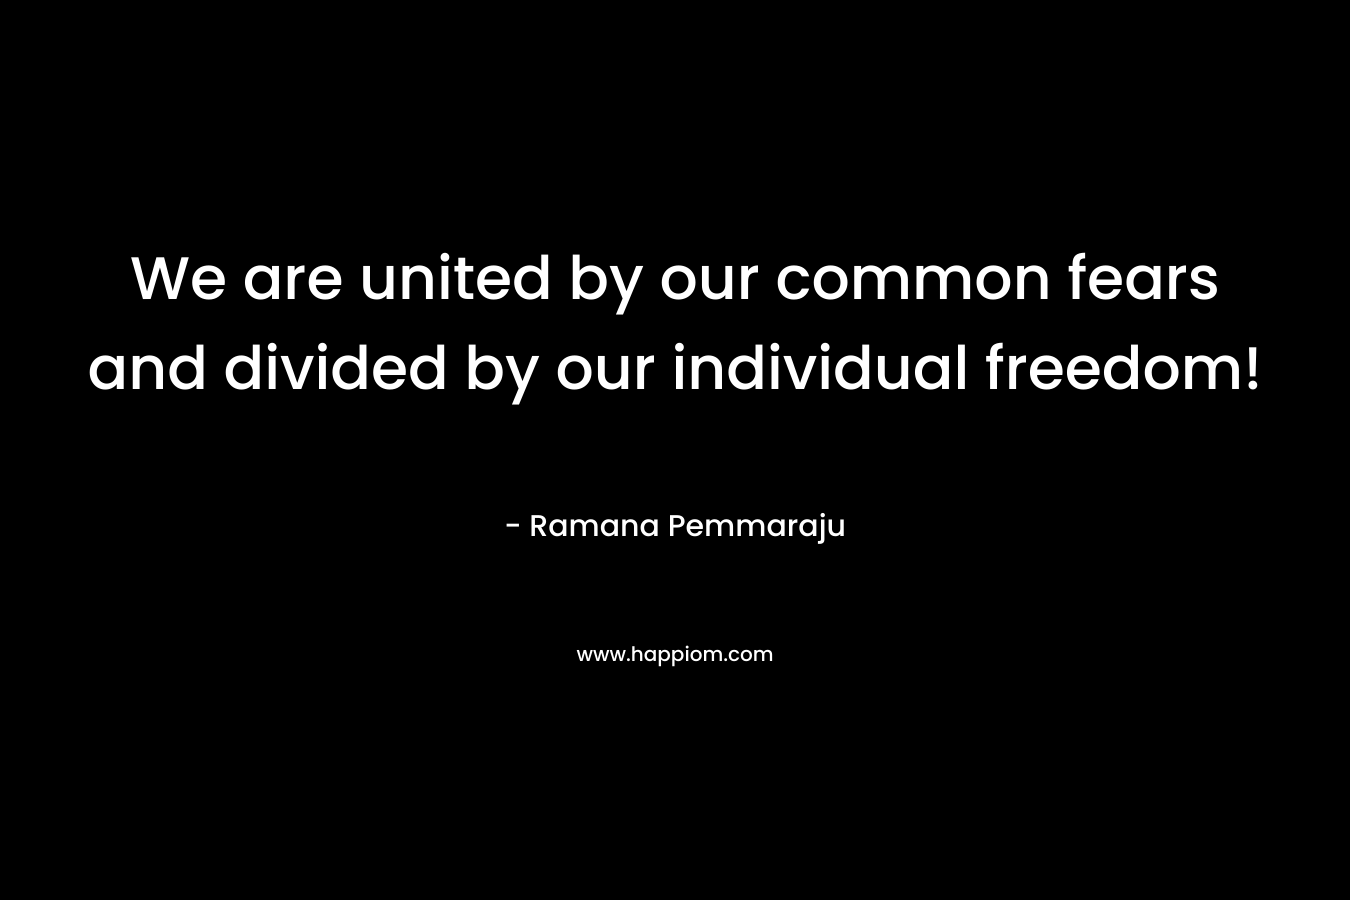 We are united by our common fears and divided by our individual freedom!